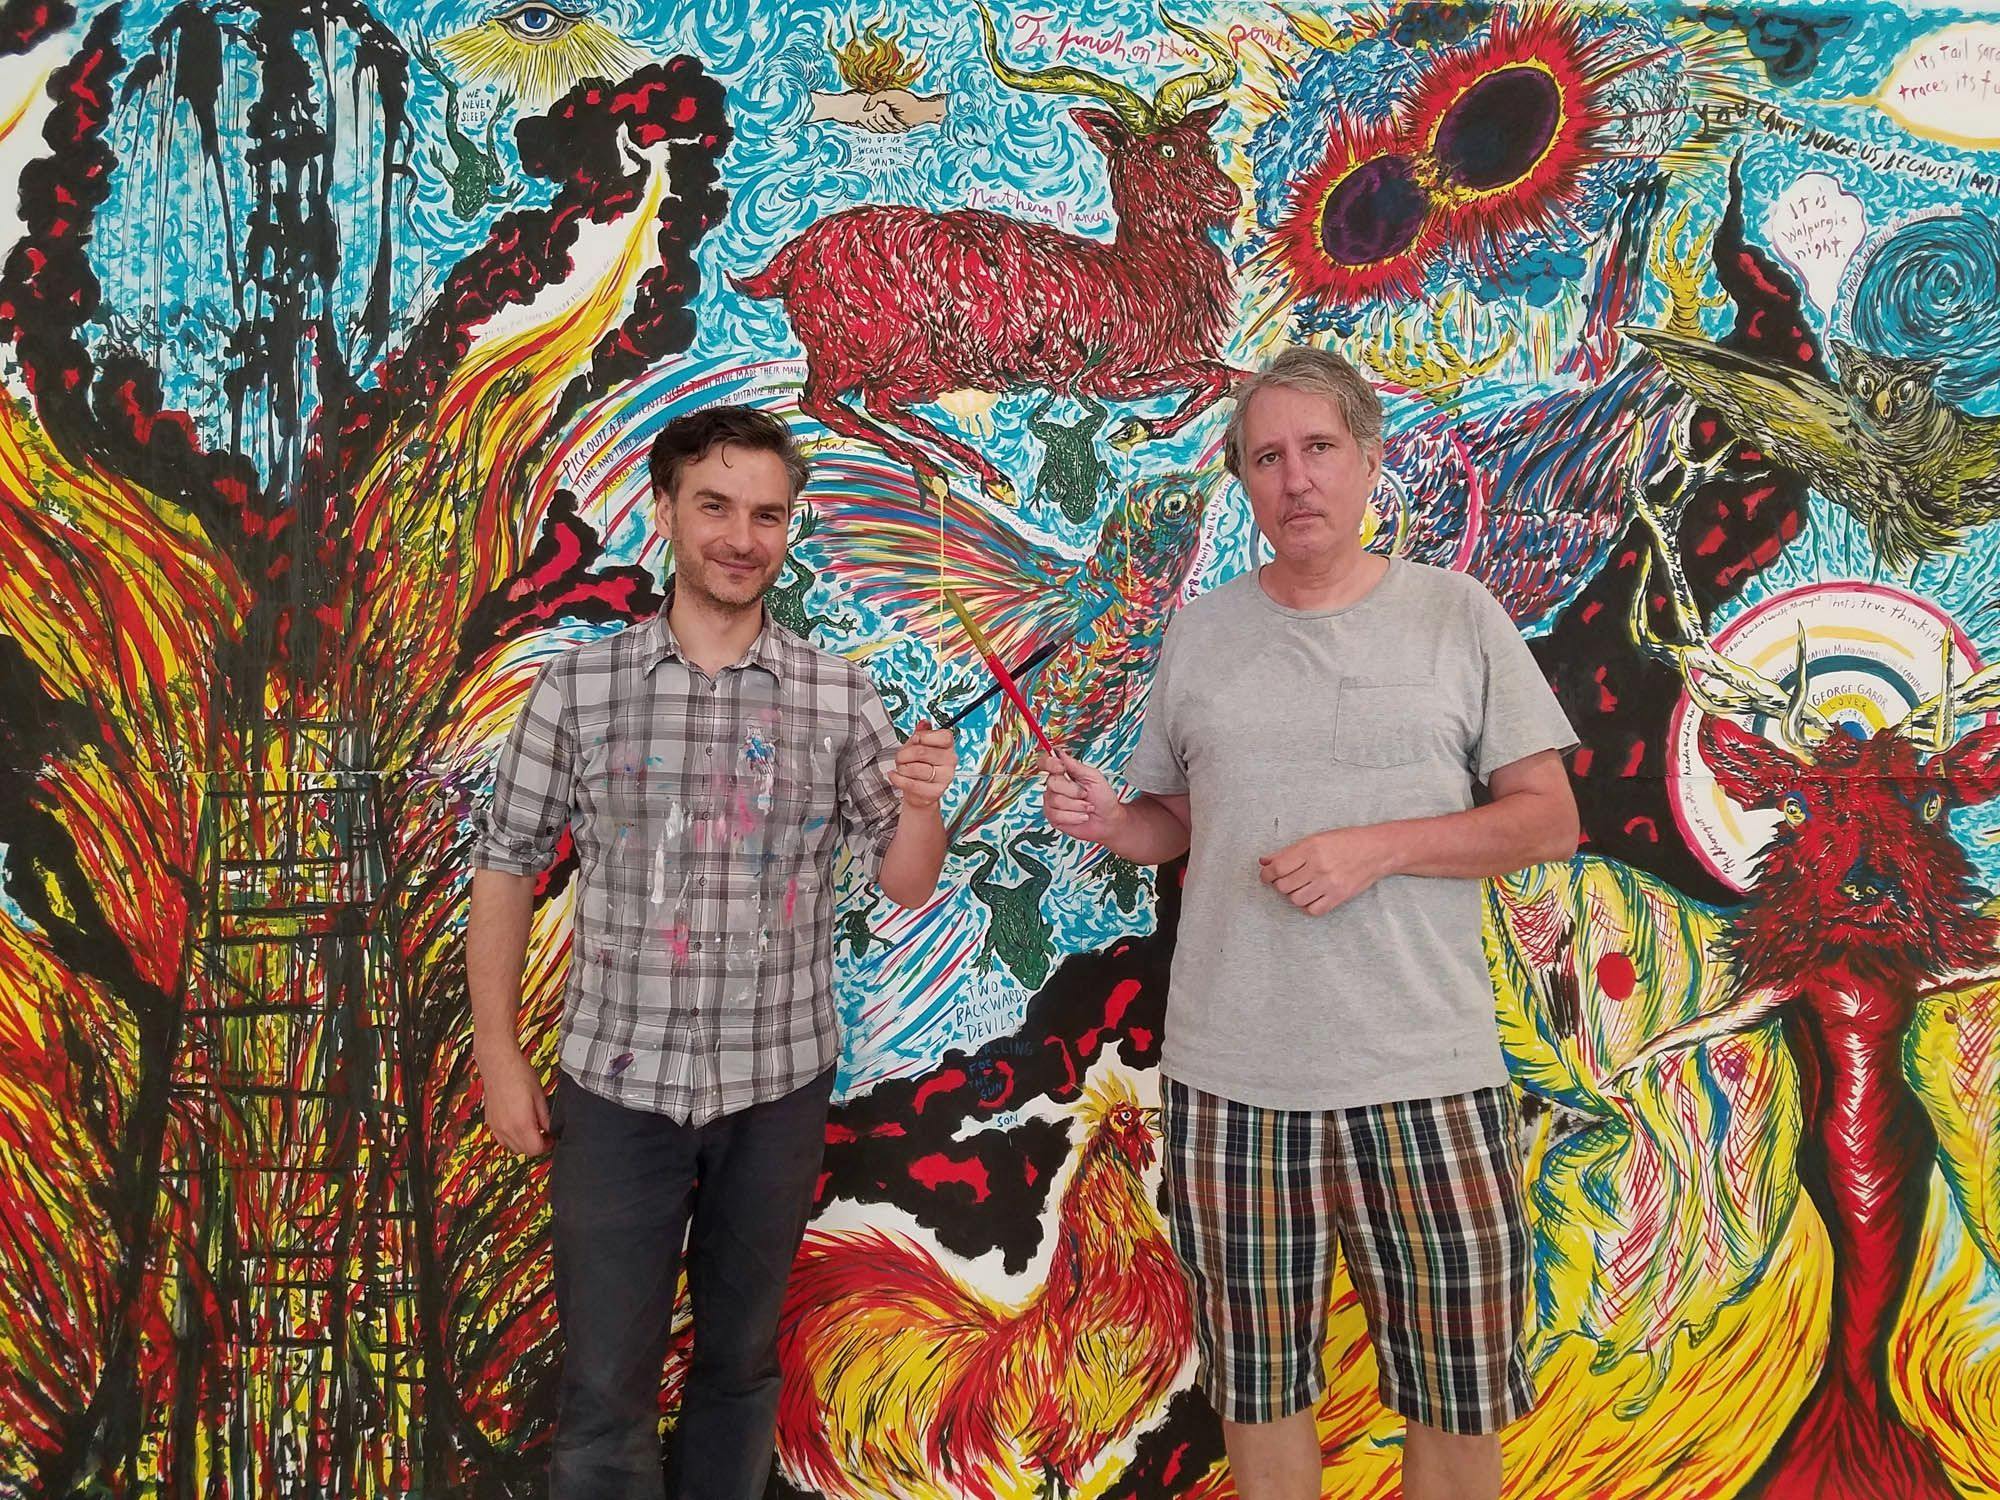 A photograph of Marcel Dzama and Raymond Pettibon working on their collaborative mural, dated 2016.